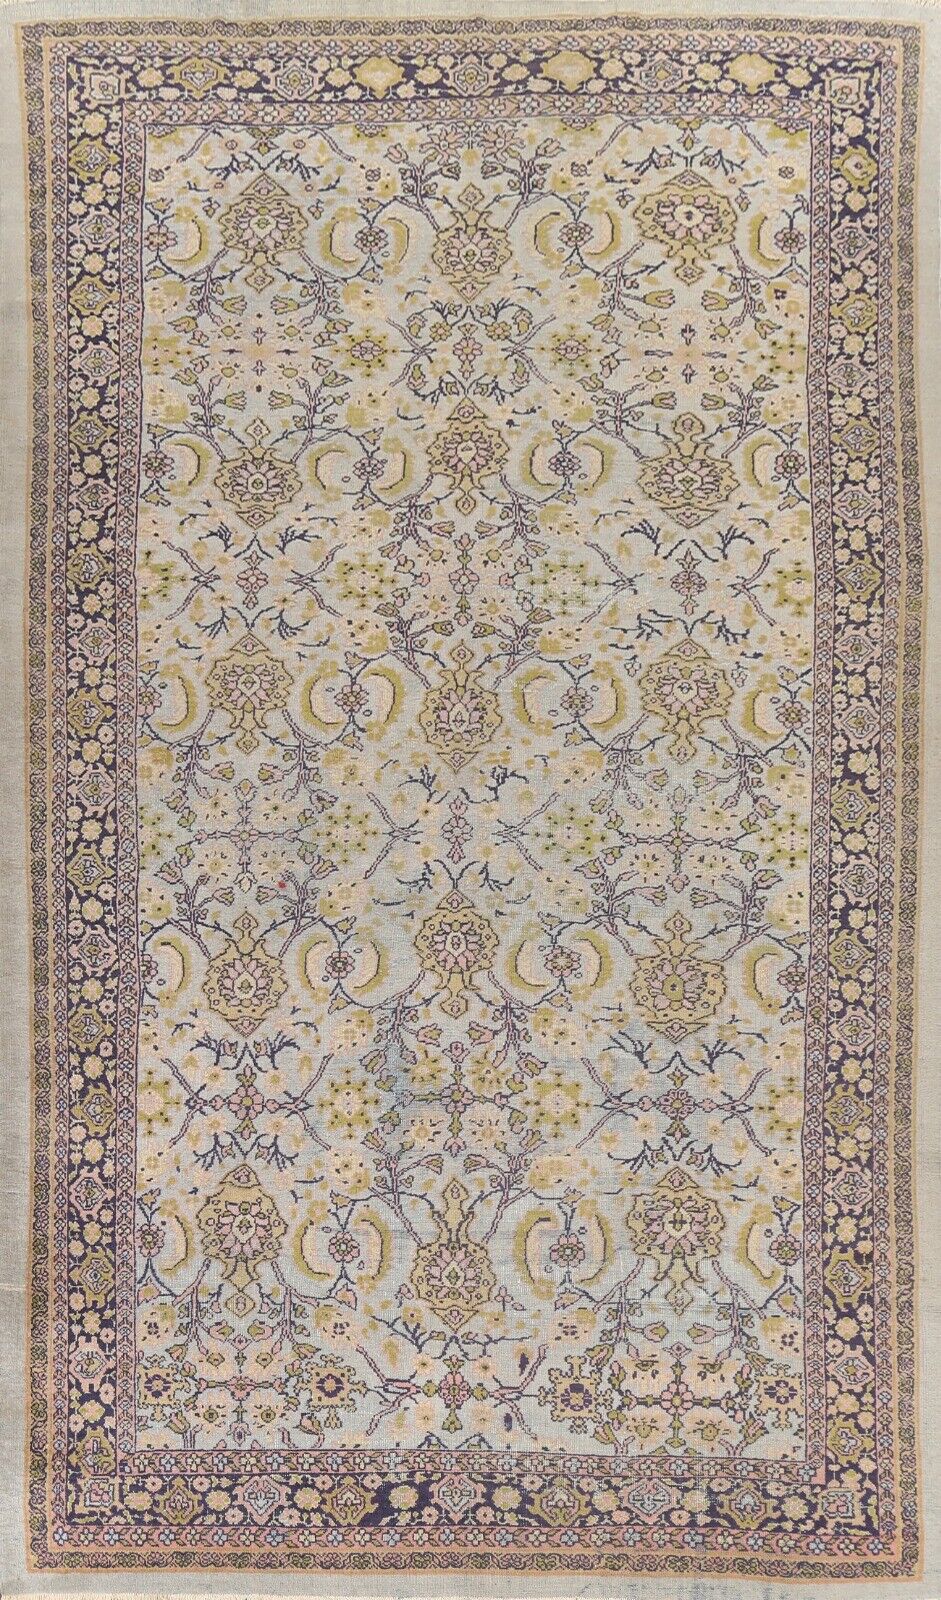 Pre-1900 Antique Vegetable Dye Sultanabad Area Rug Hand-knotted LIGHT BLUE 8x13